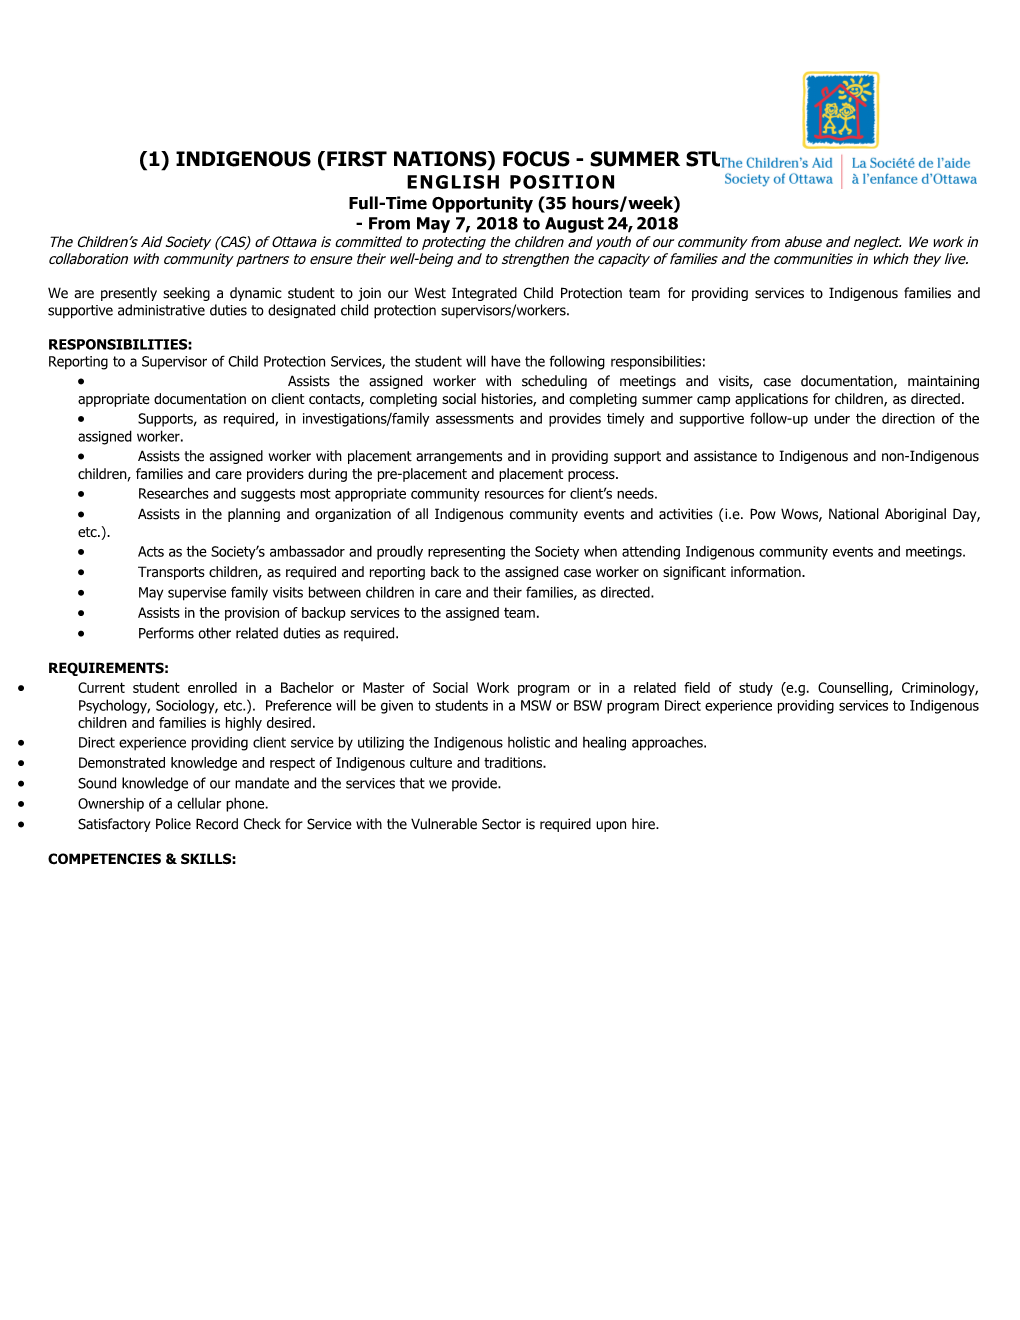 (1) Indigenous (First Nations) Focus - Summer Student Position